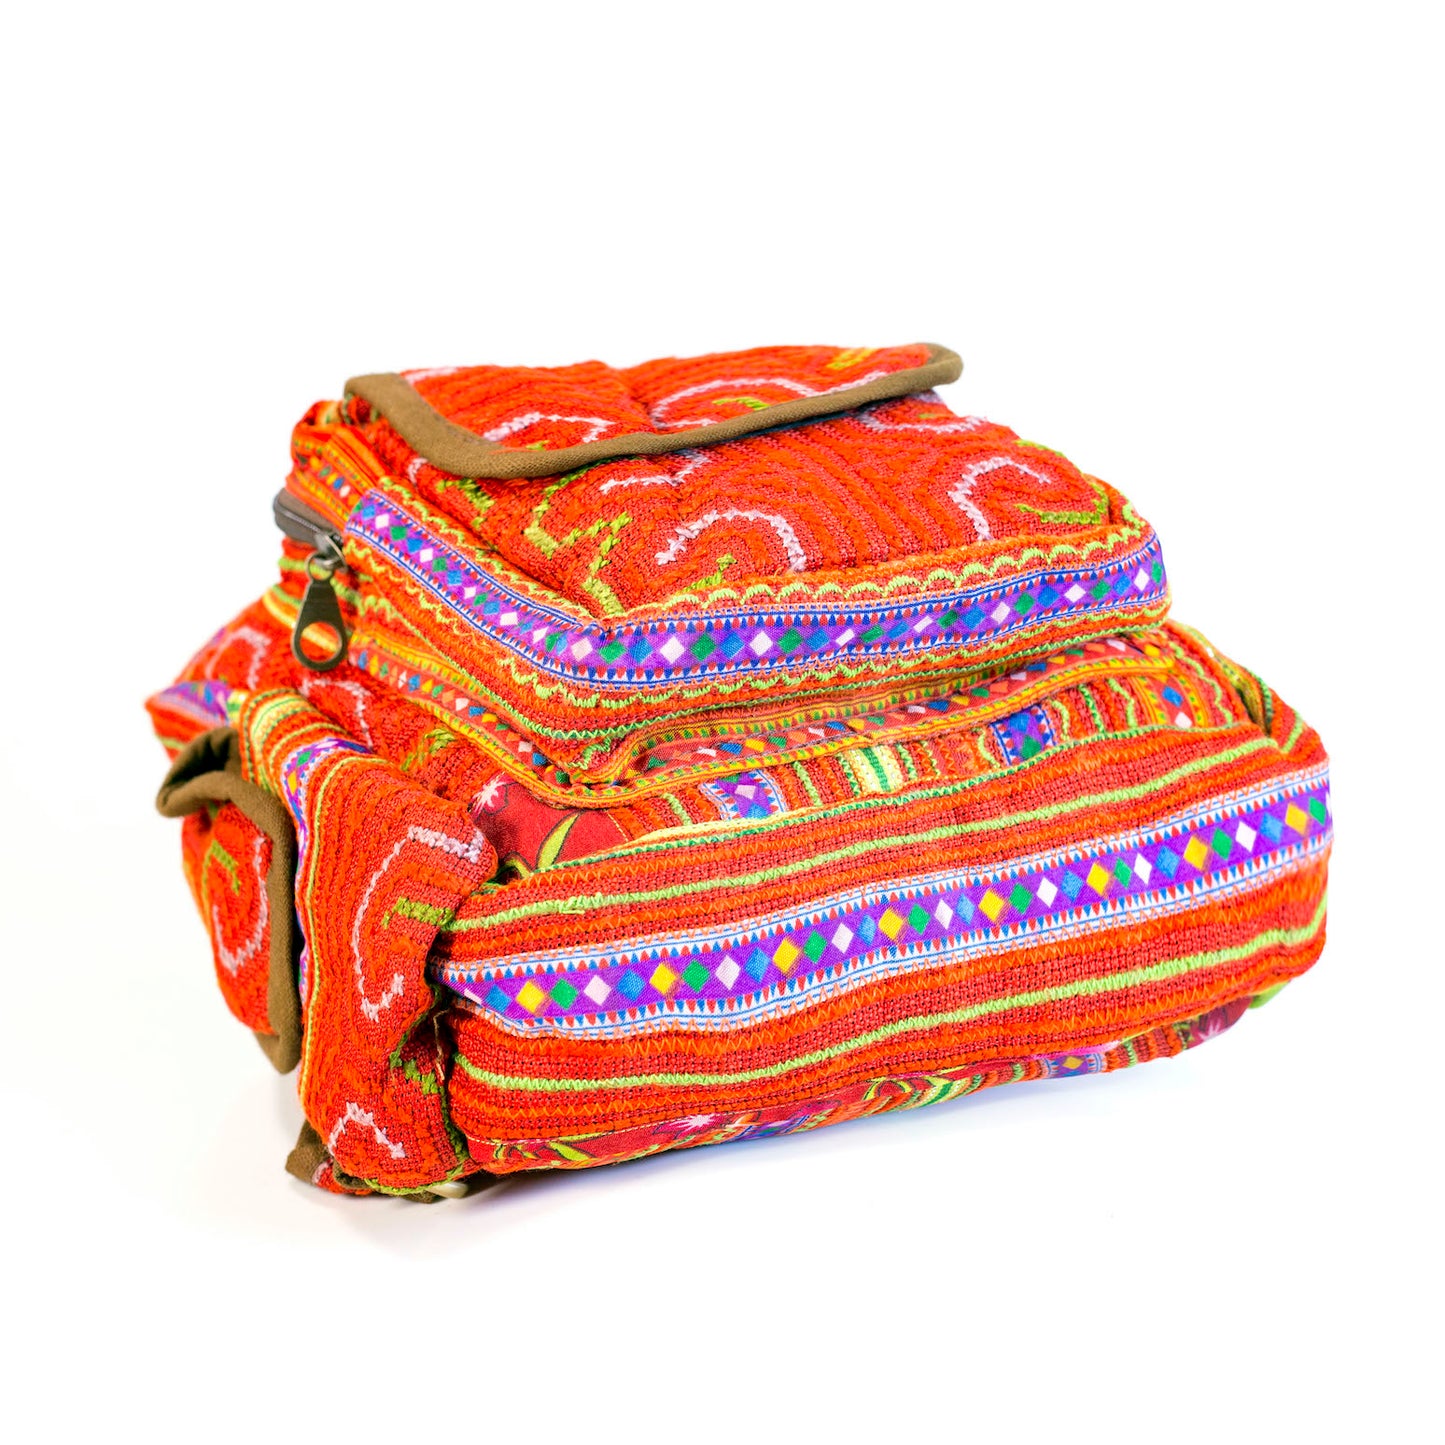 Boho-style linen, embroidery Sling bag, H'mong tribal pattern in RED silk thread